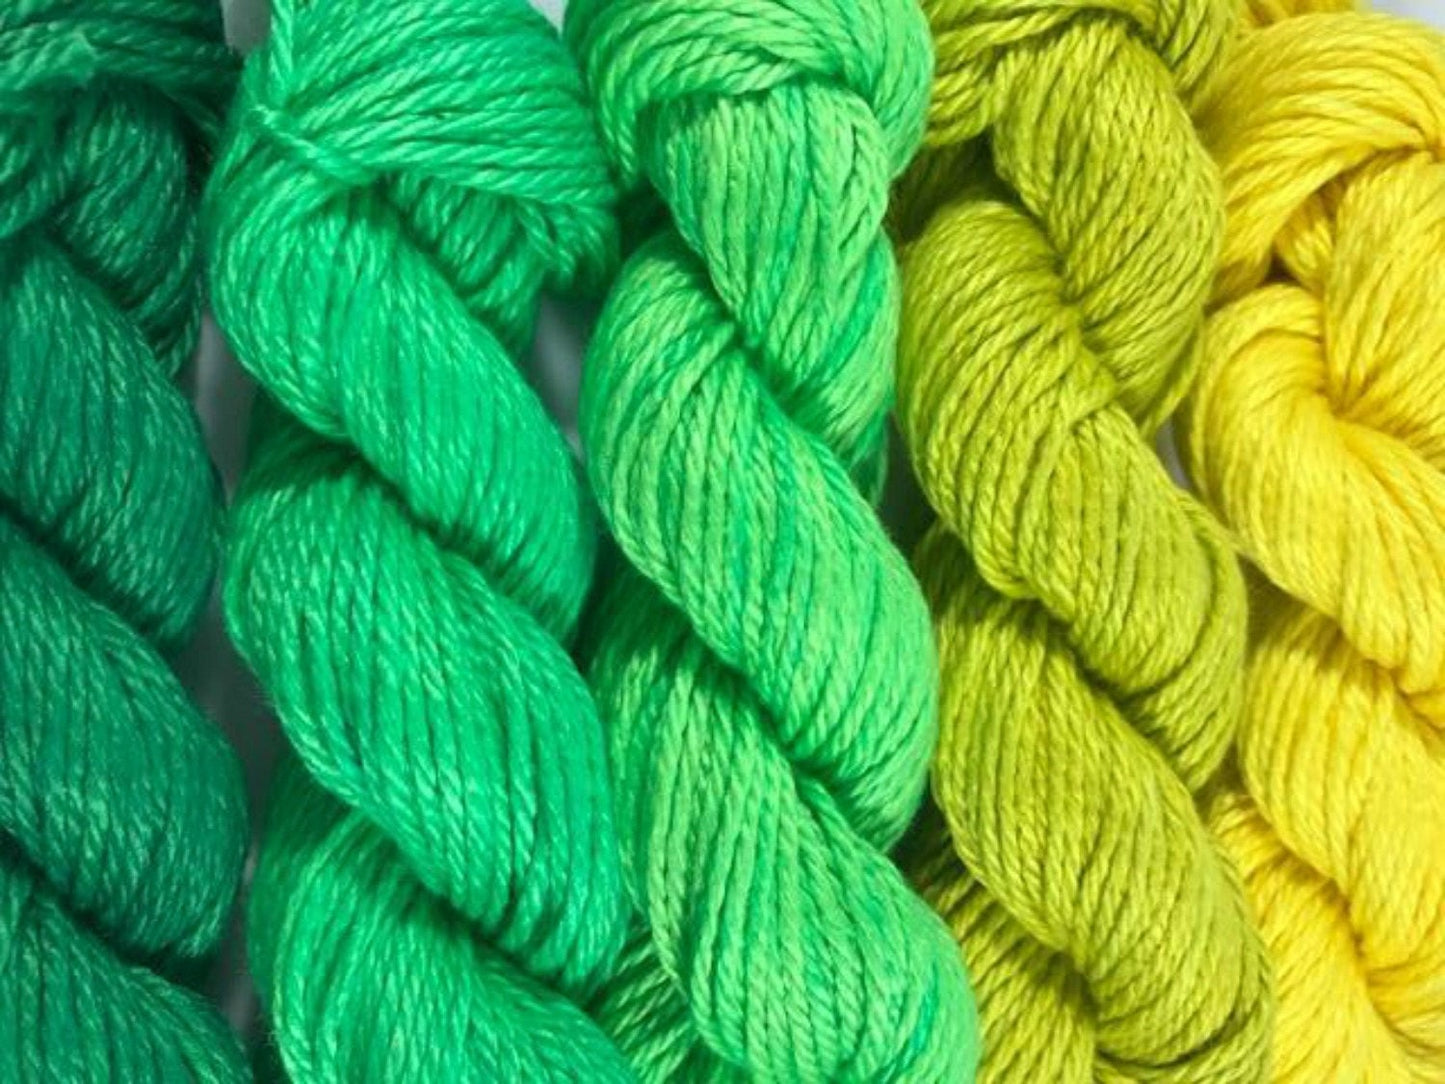 Hand Dyed Yarn - Yellow Green Gradient Kit - Semi Solids - Tonals - 3 Ply - Plant Based - DK Light Worsted - Bamboo Cotton - Soft Baby Yarn